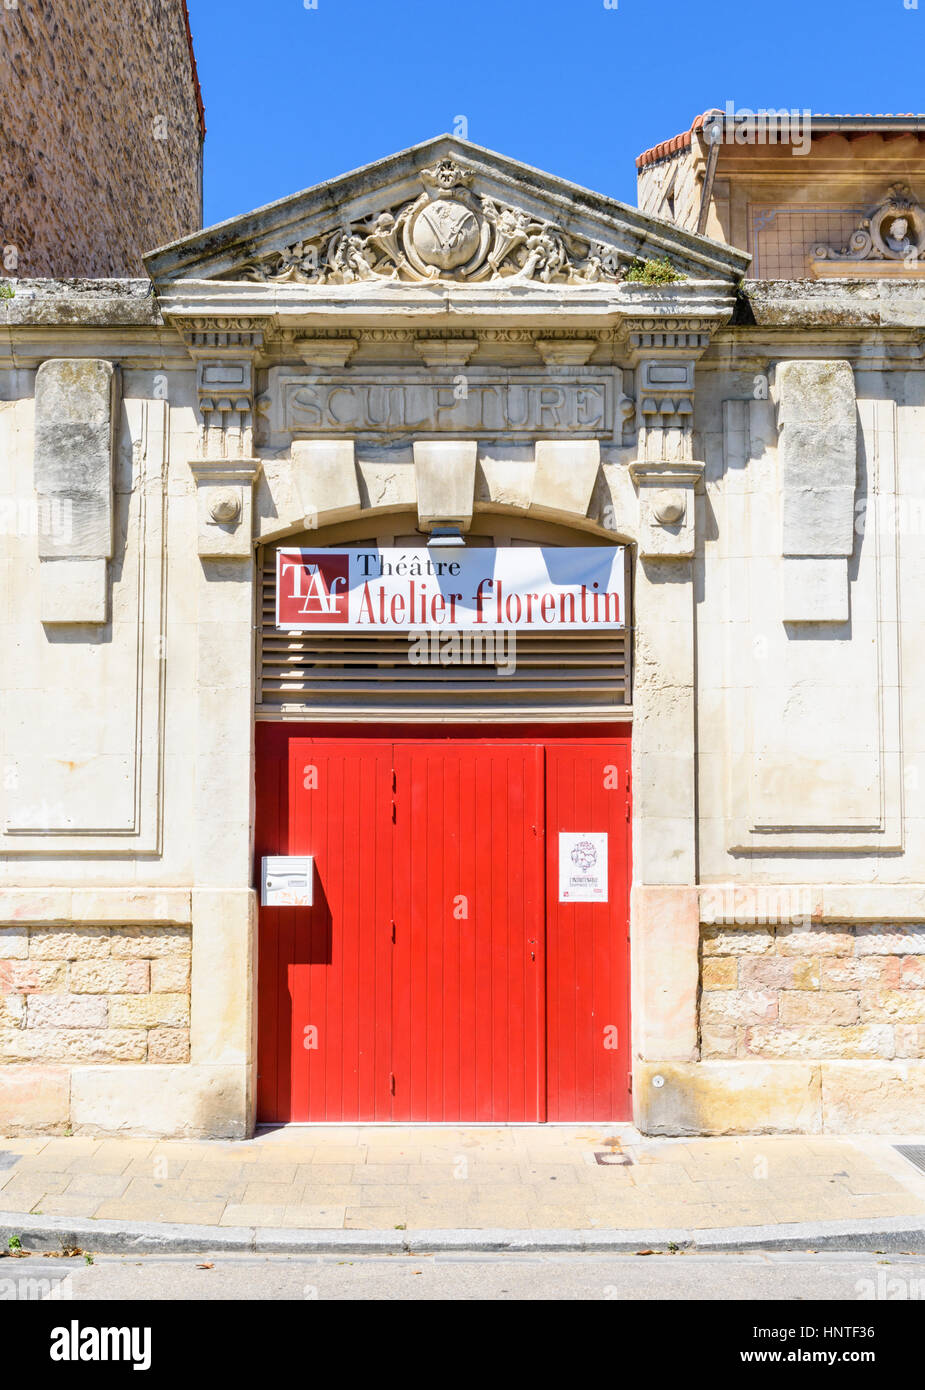 Small doorway and entrance facade of the Theatre Atelier Florentin along rue Guillaume Puy, Avignon, France Stock Photo